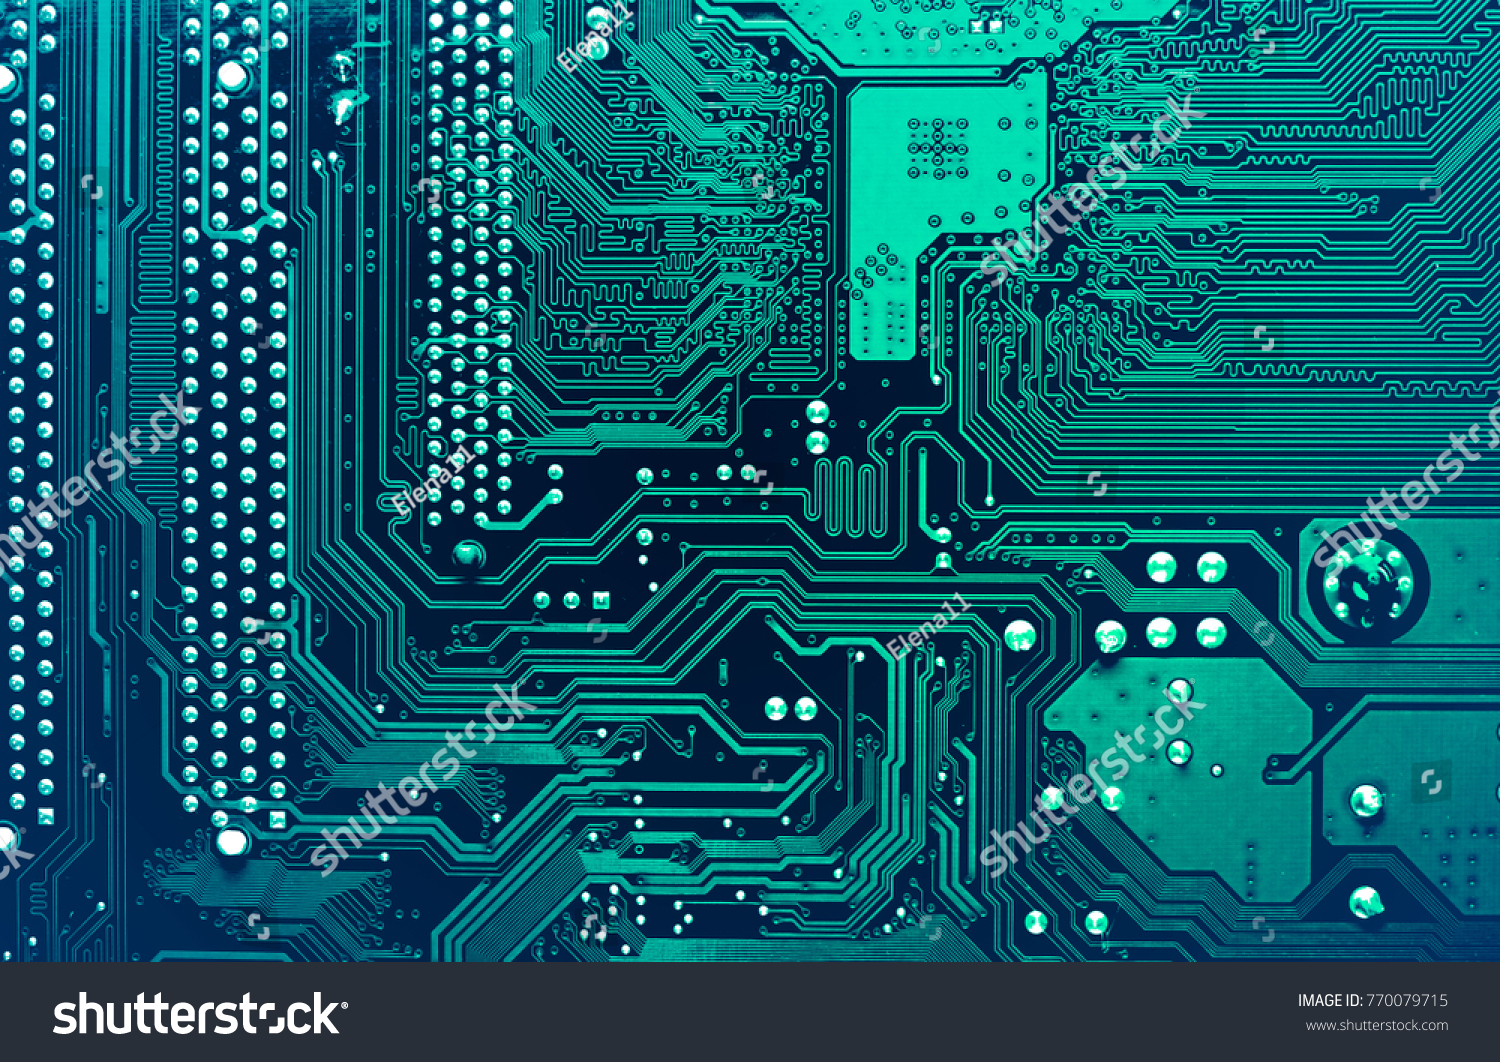 Circuit board. Electronic computer hardware technology. Motherboard digital chip. Tech science background. Integrated communication processor. Information engineering component. #770079715